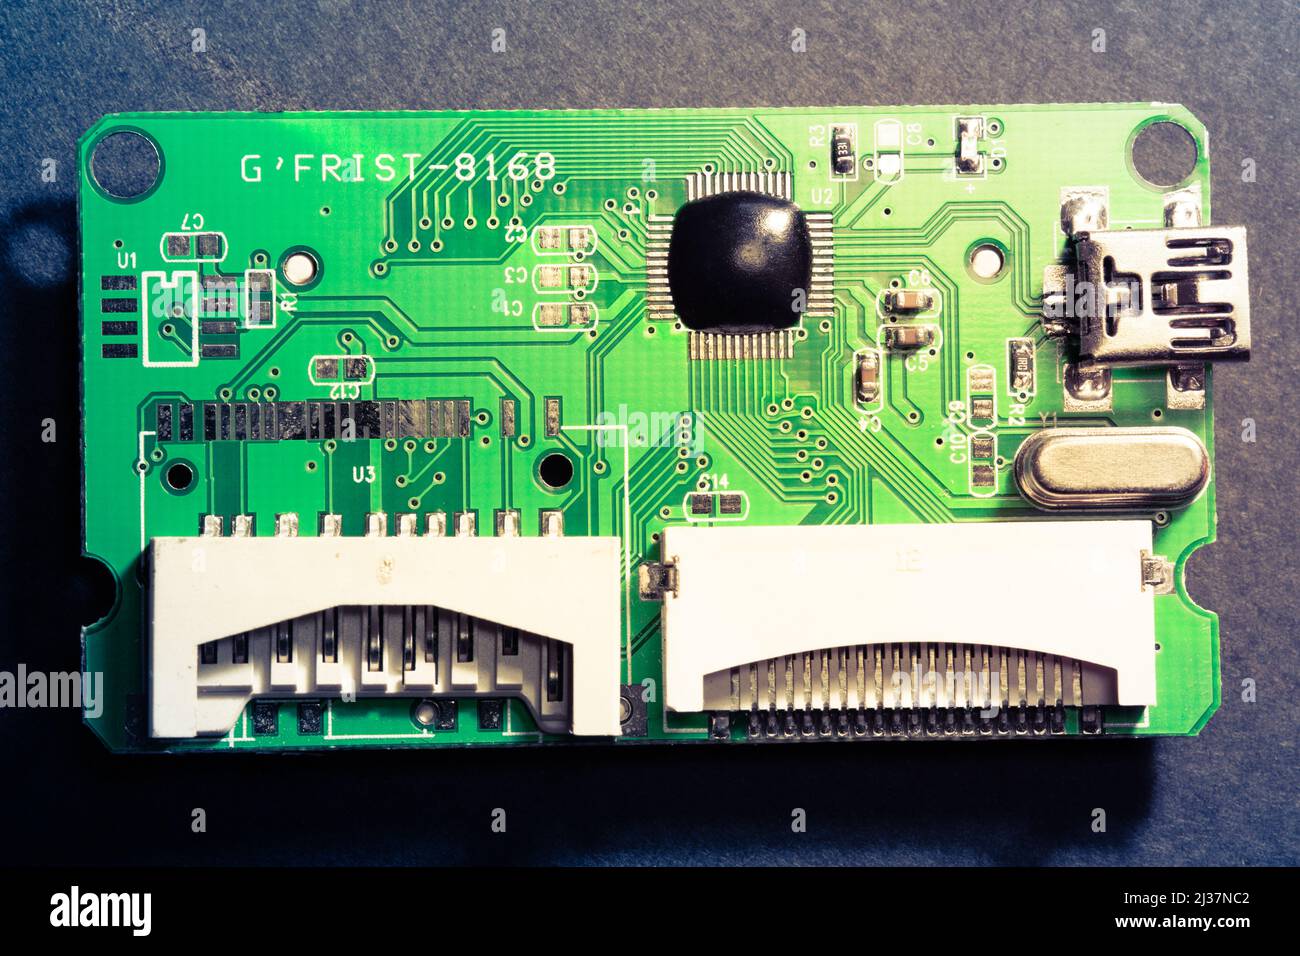 Top view of PCB board of a CF, micro SD and SD card reader. Electronic circuit elements and connection inputs on the main board. Stock Photo